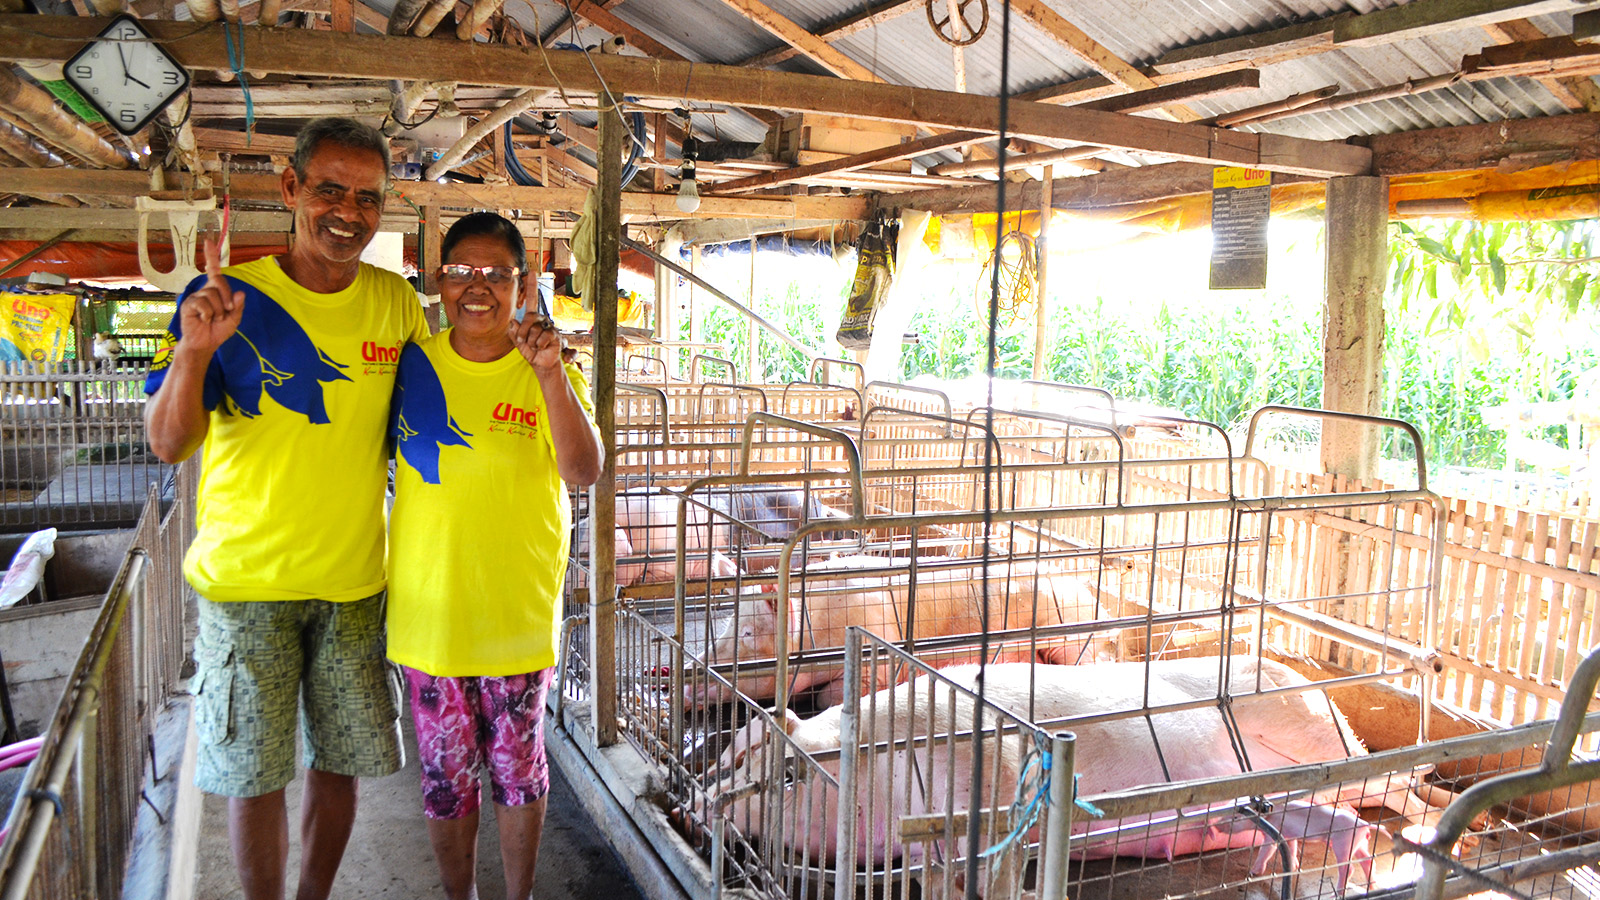 Pinoy Hog Raisers Are Finding Hope Through This Support Program